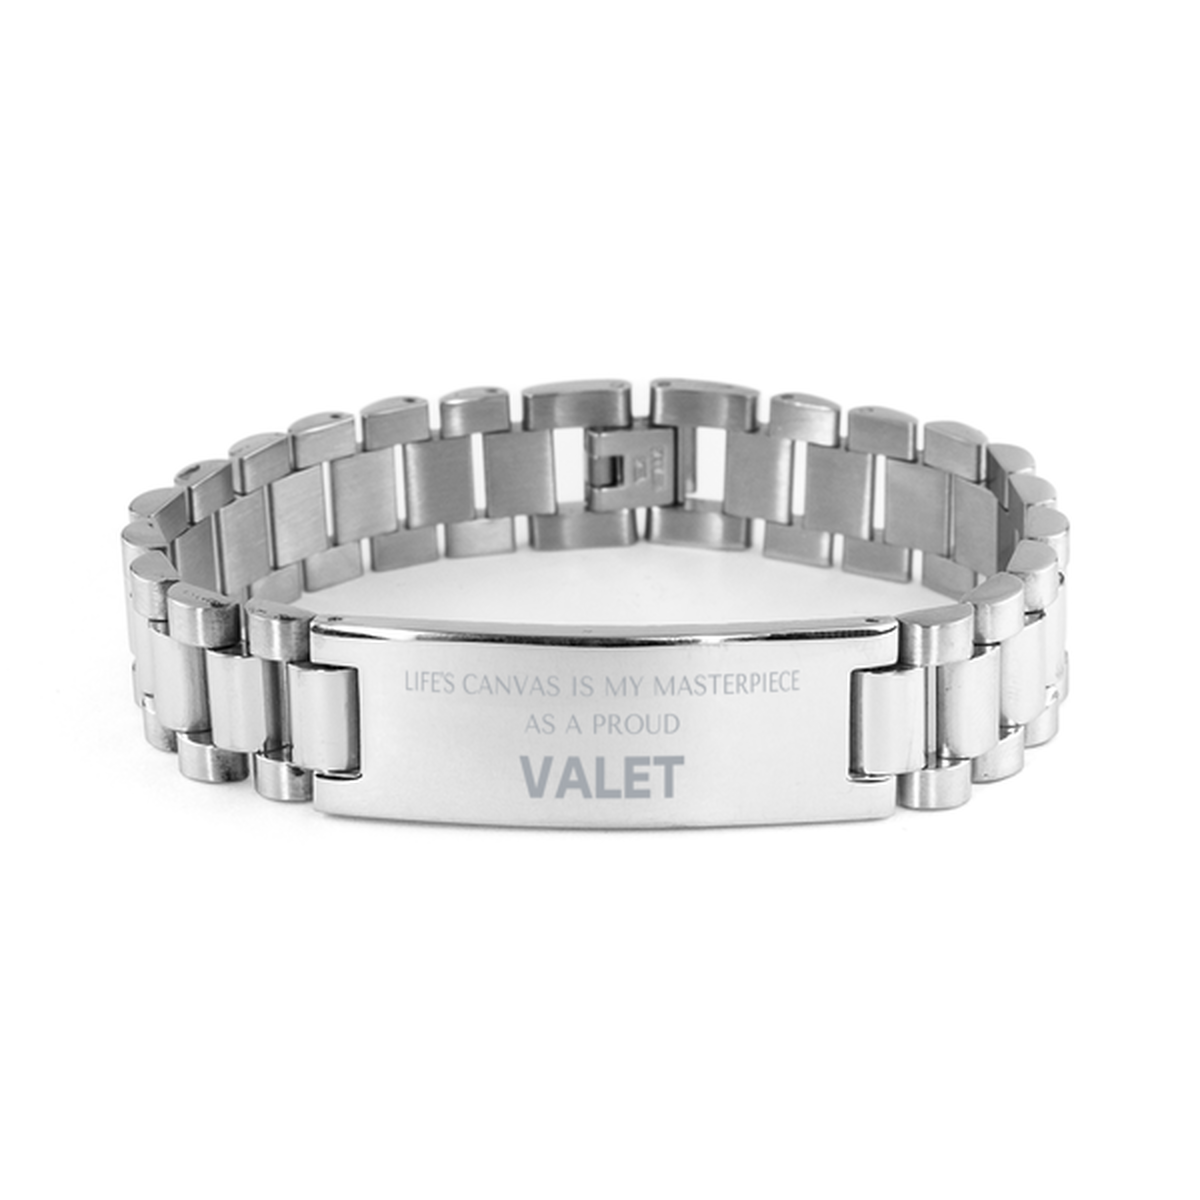 Proud Valet Gifts, Life's canvas is my masterpiece, Epic Birthday Christmas Unique Ladder Stainless Steel Bracelet For Valet, Coworkers, Men, Women, Friends